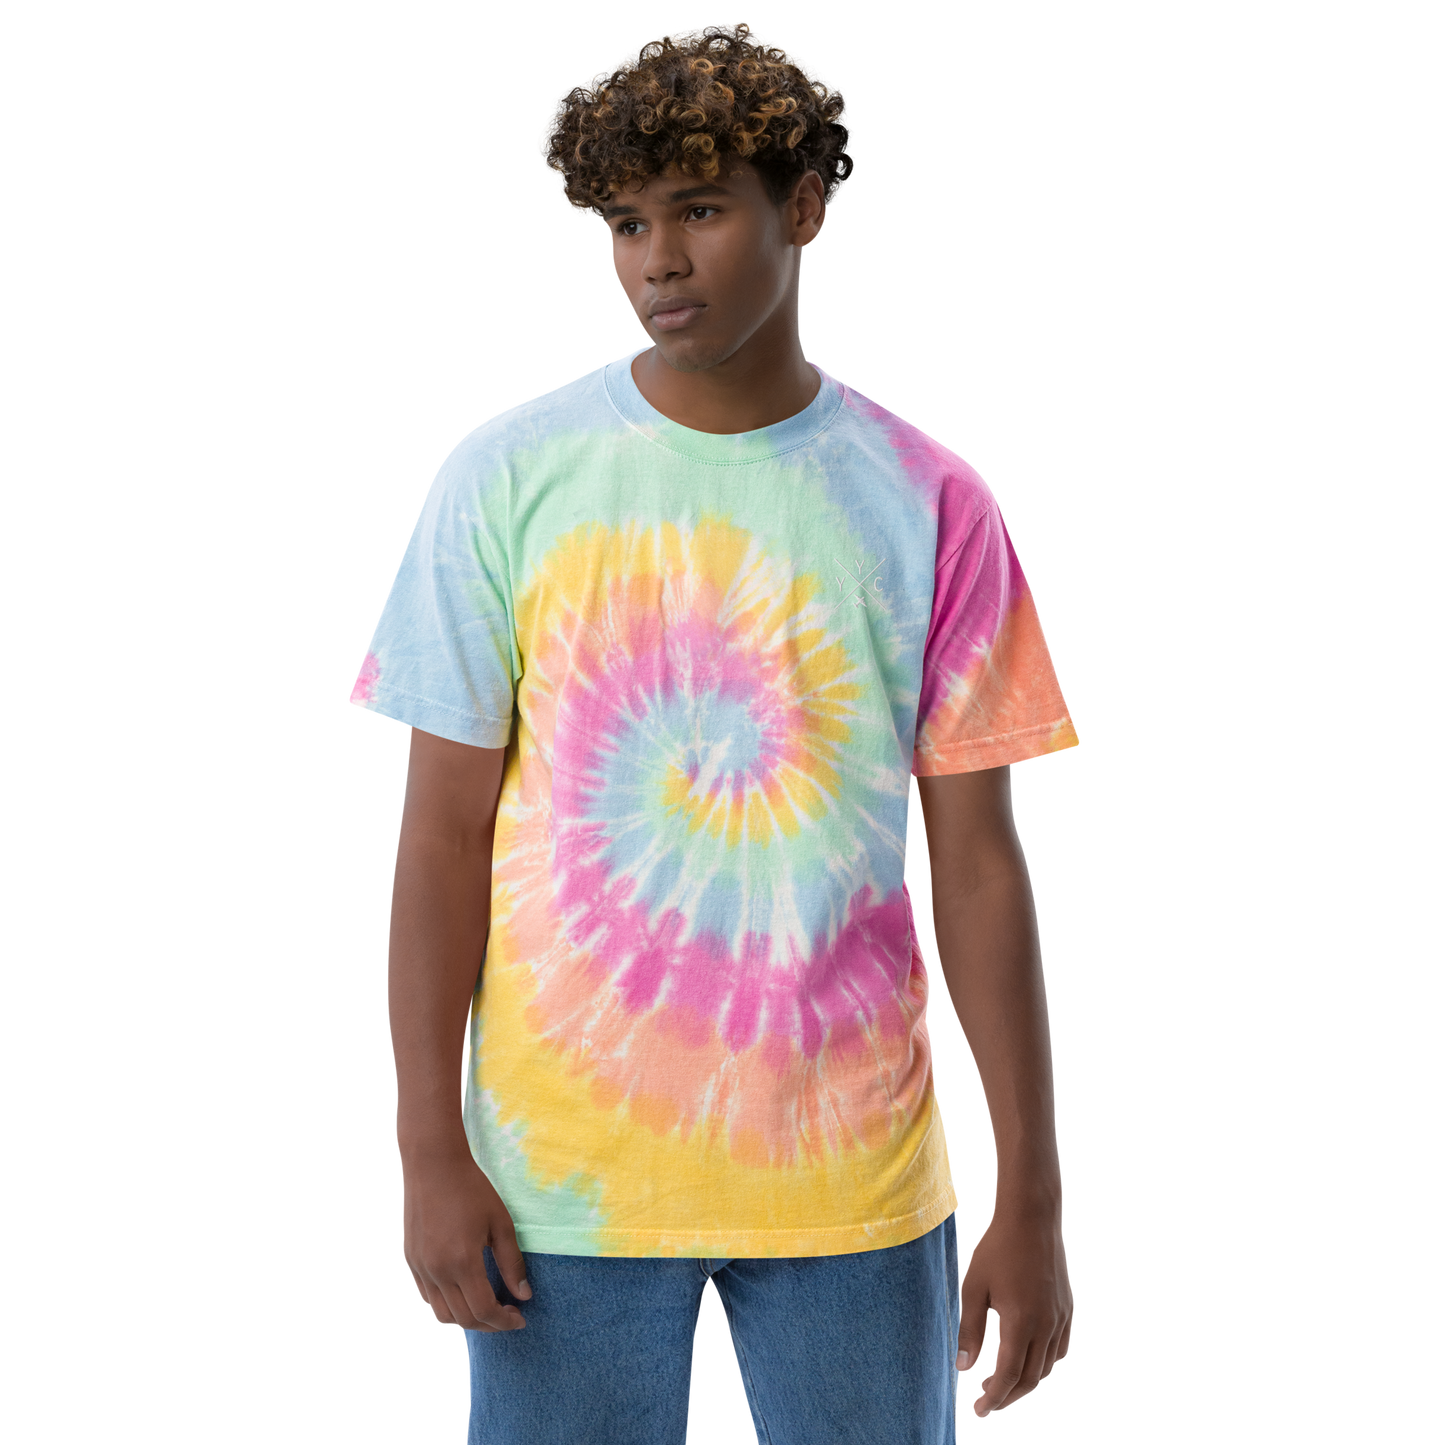 YHM Designs - YYC Calgary Oversized Tie-Dye T-Shirt - Crossed-X Design with Airport Code and Vintage Propliner - White Embroidery - Image 04